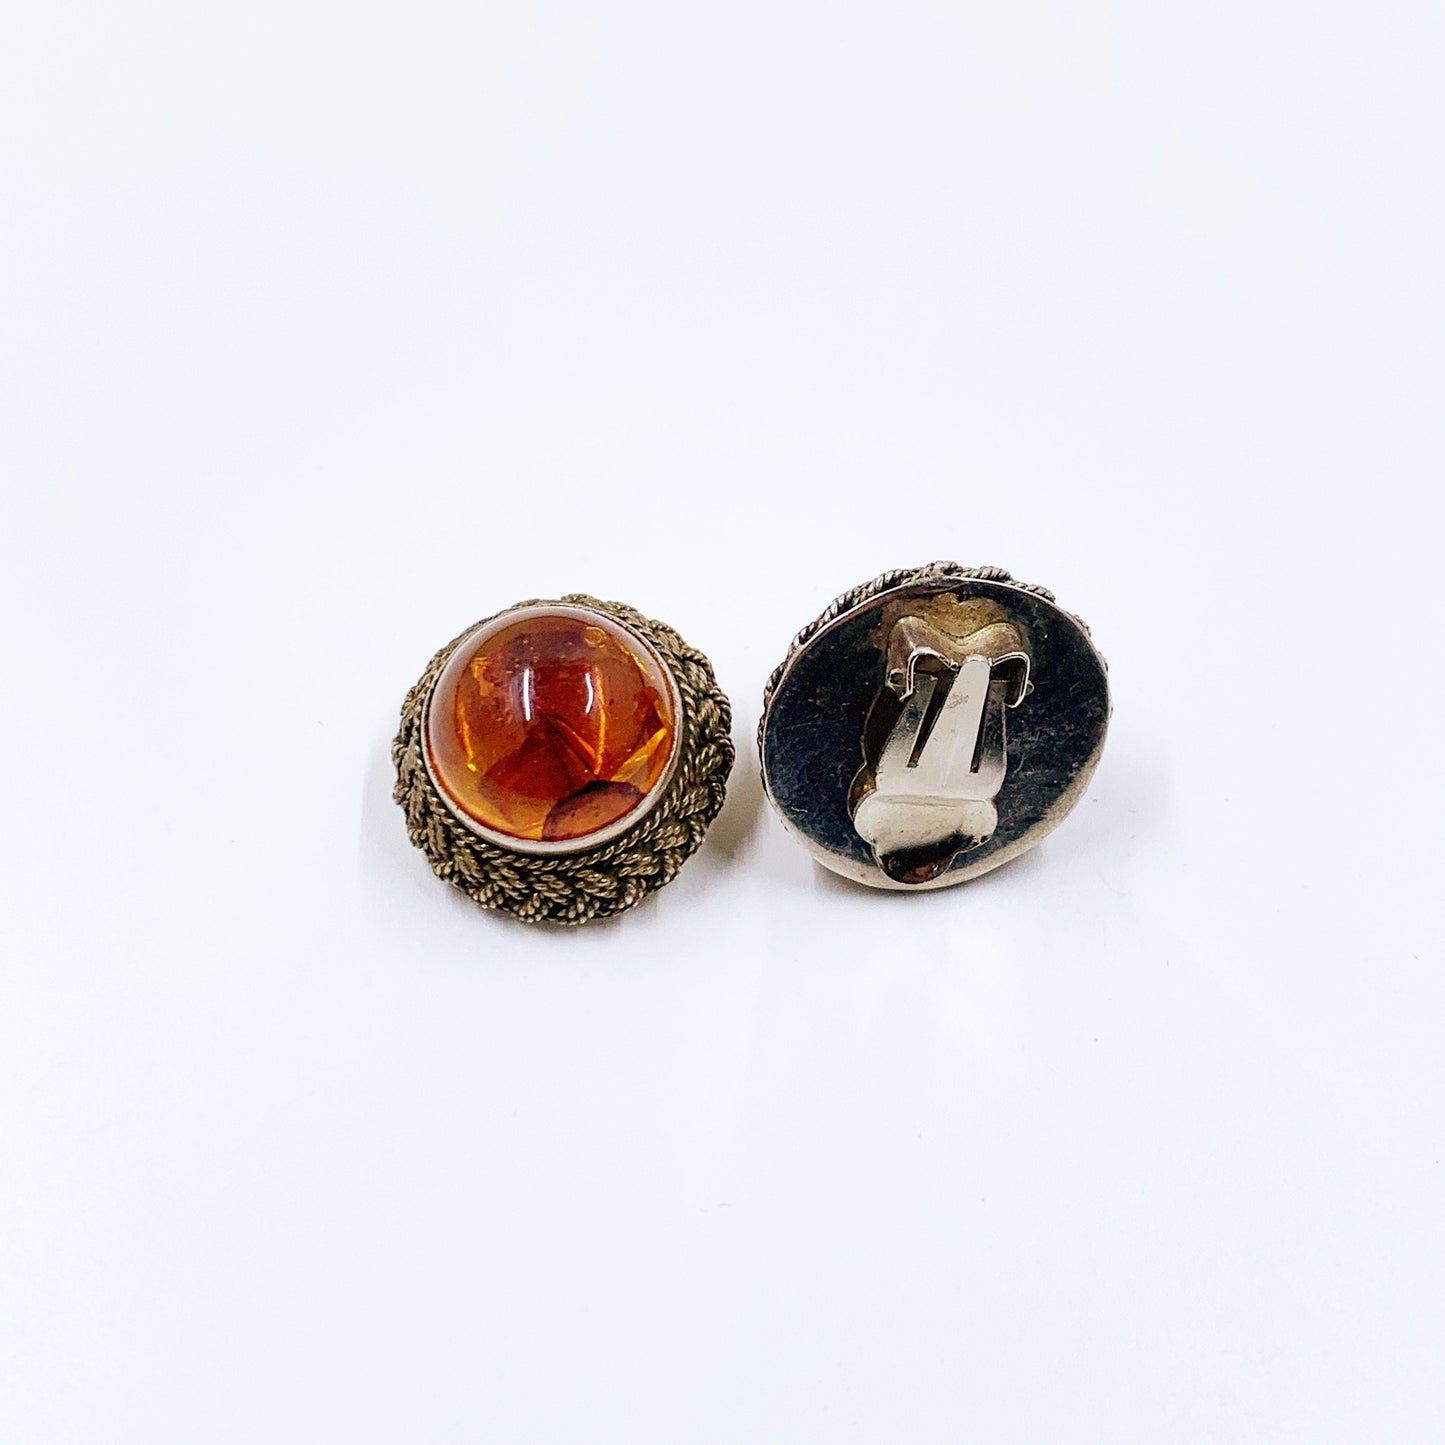 Vintage Silver Amber Clip On Earrings | Vintage Round Amber Roped Earrings